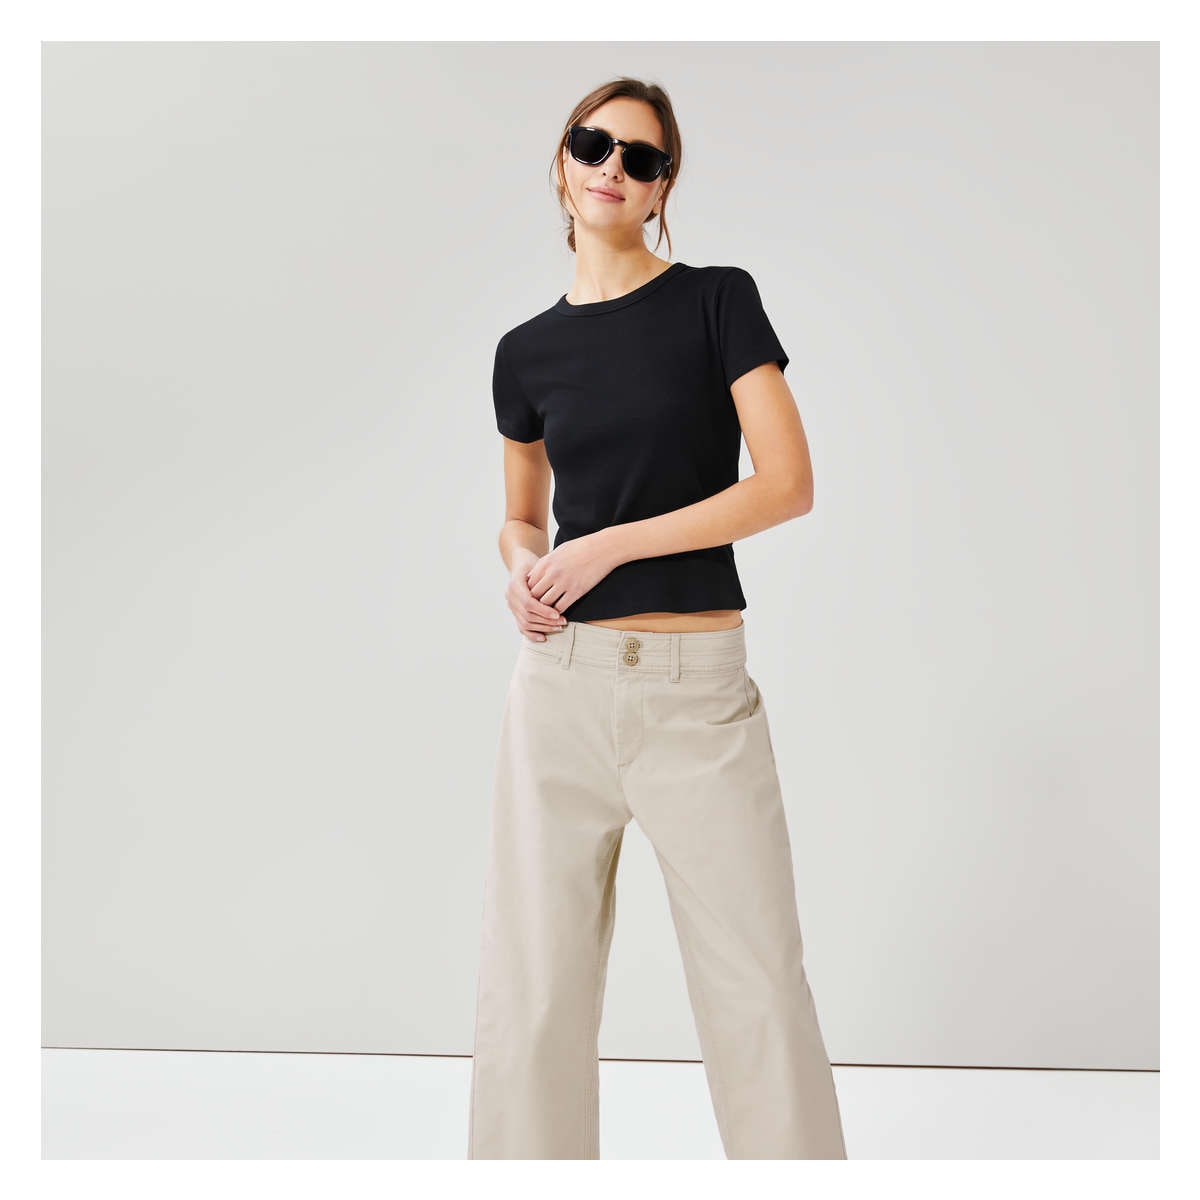 High Rise Pant in Light Taupe from Joe Fresh